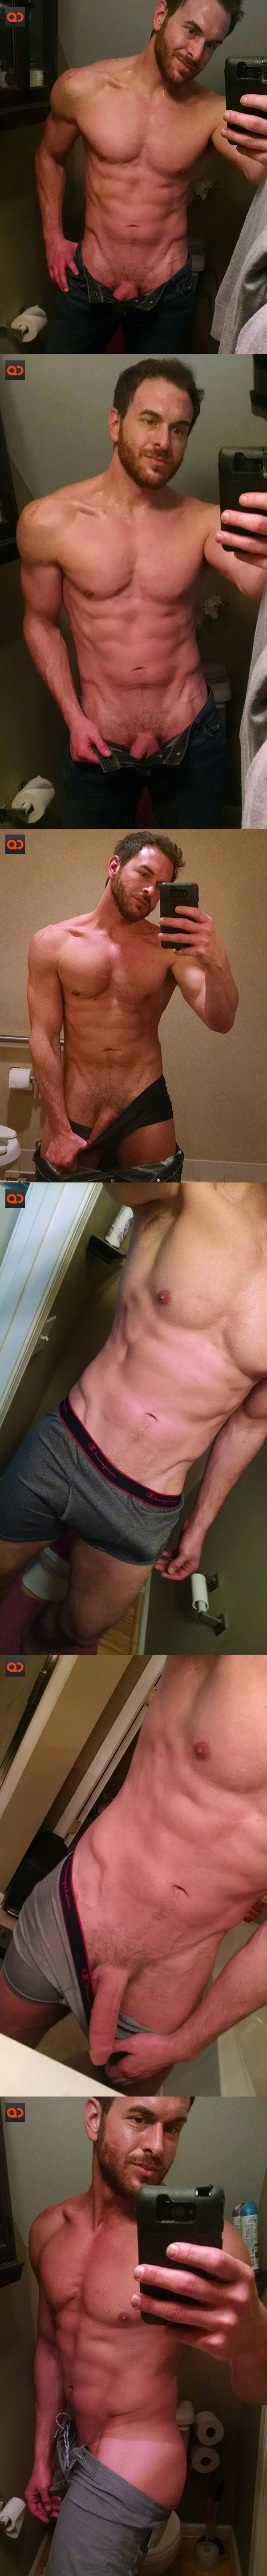 nude_bf_of_the_week-chubby_bunny-collage02